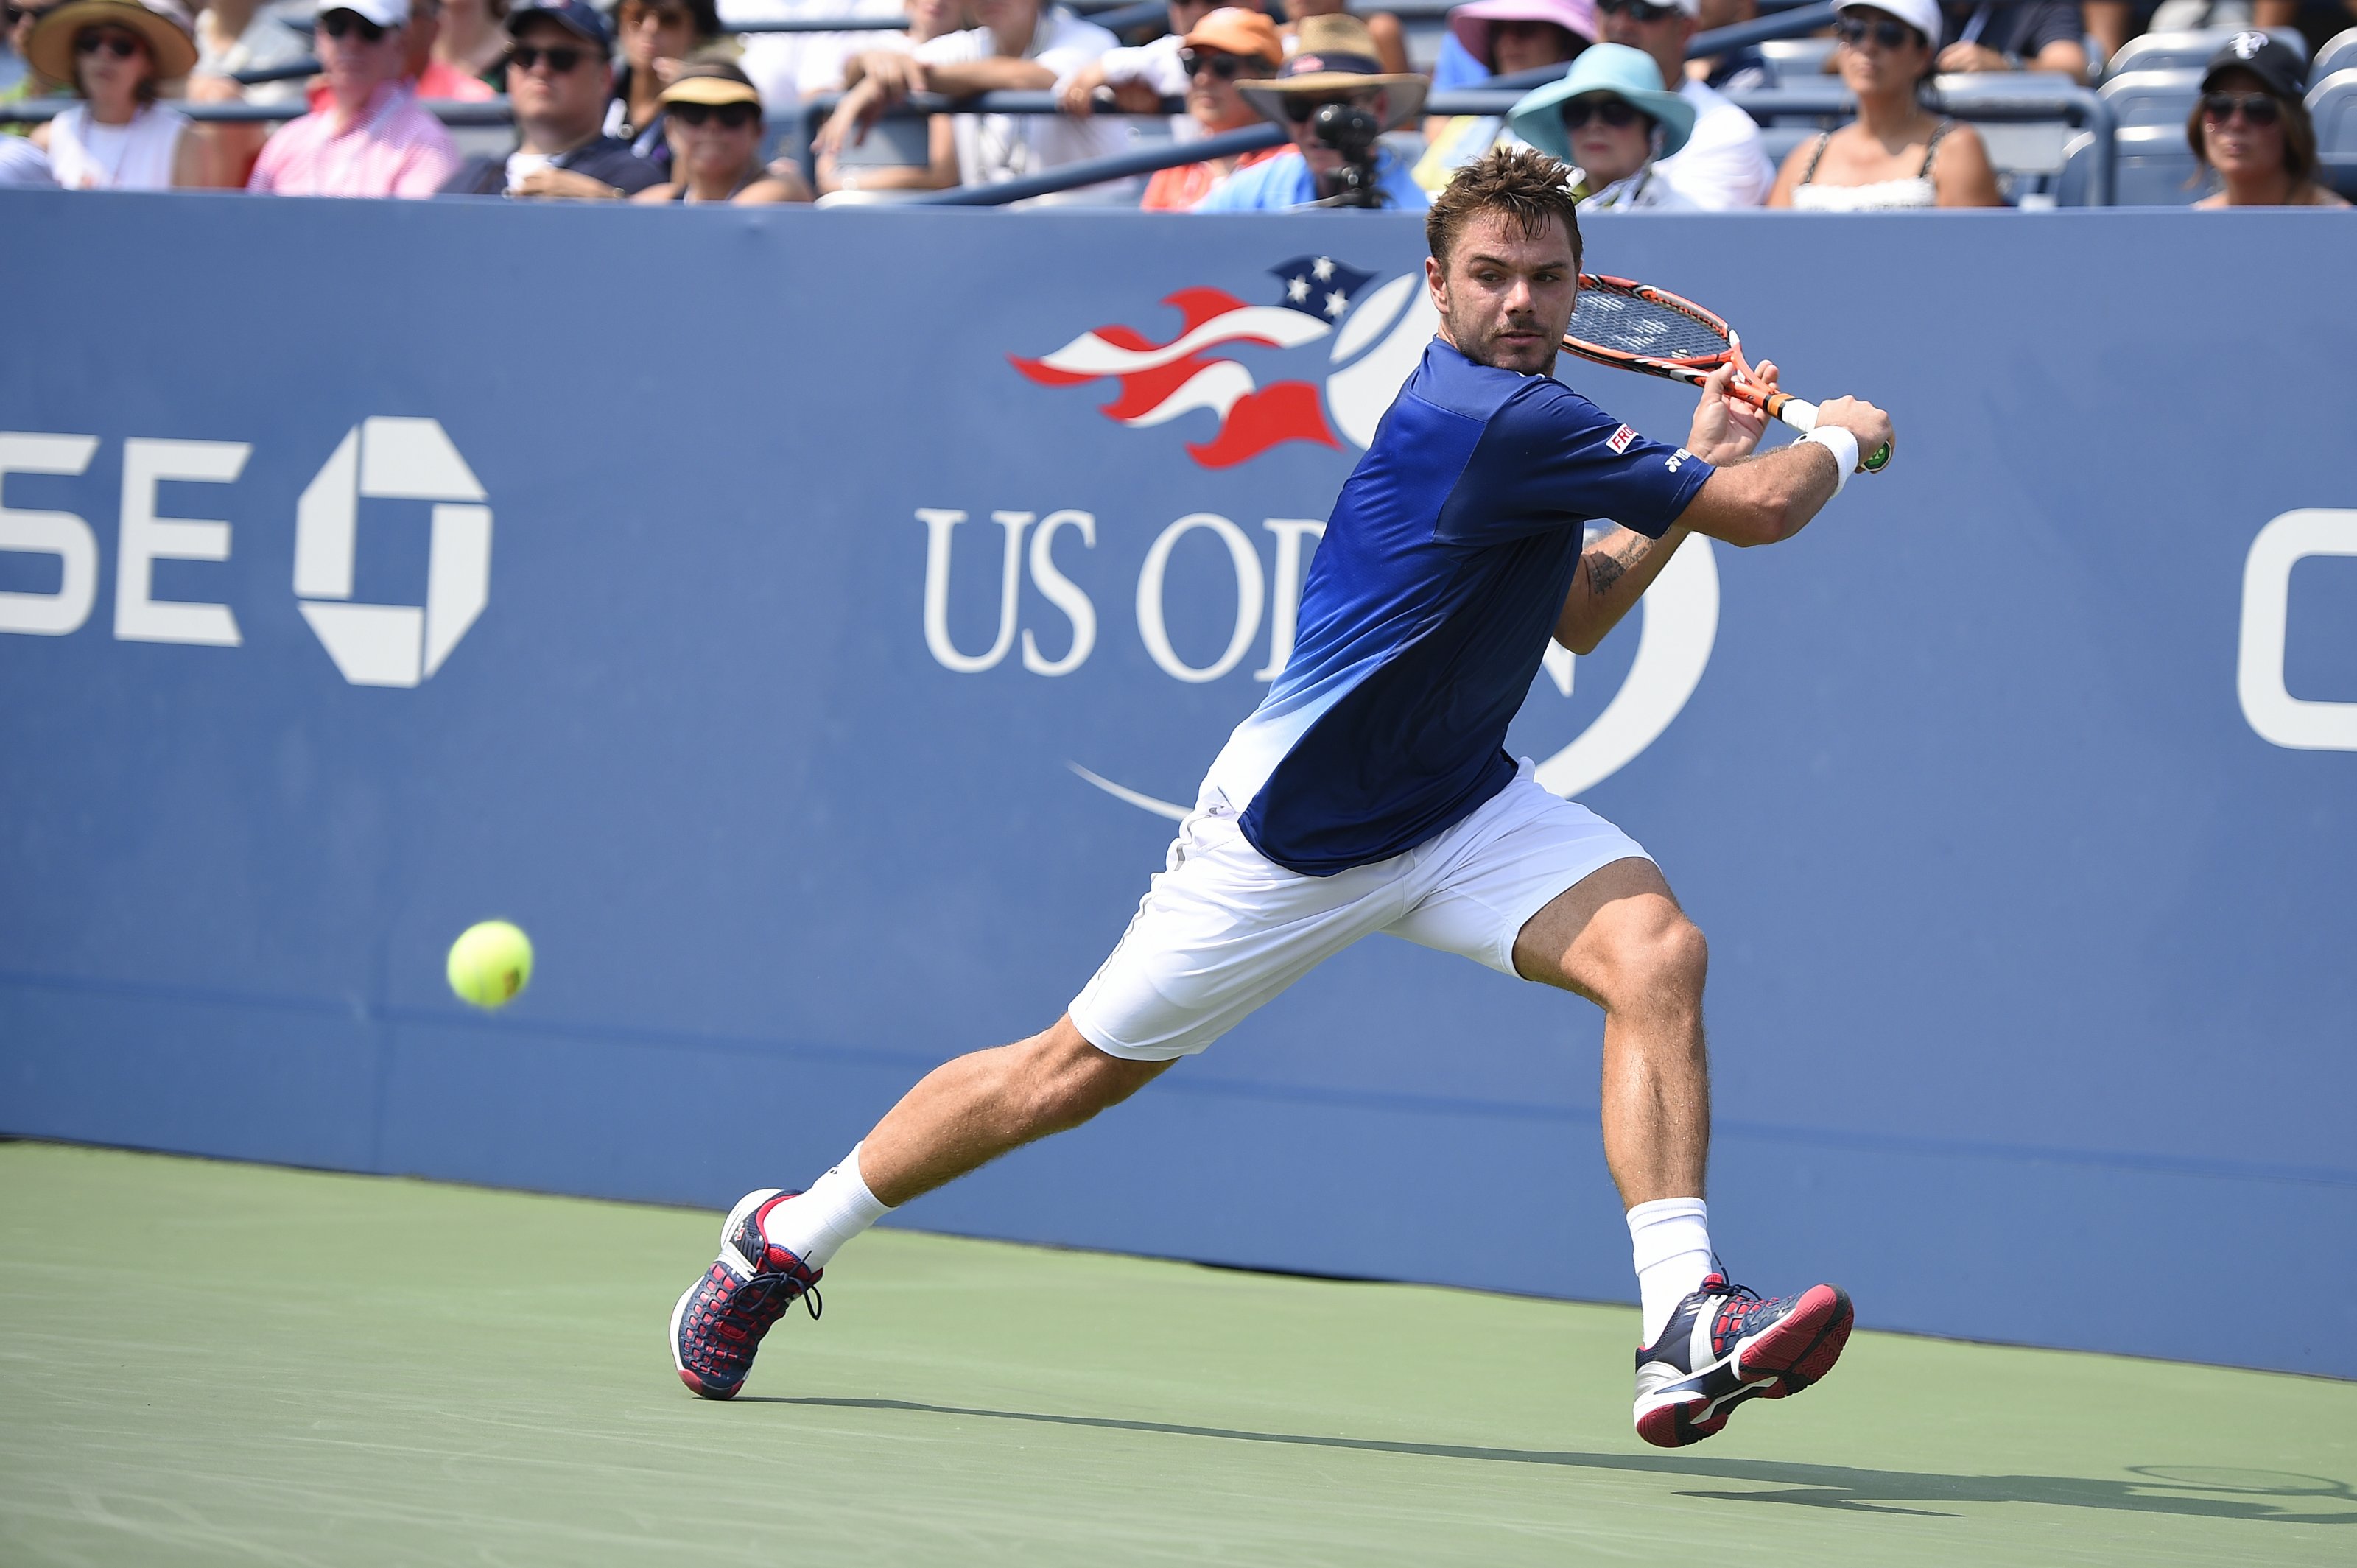 Stan Wawrinka of Switzerland plays his second round match at the US Open at the USTA Billie Jean King National Tennis Center in the Flushing neighborhood of the Queens borough of New York City, NY, USA on September 3, 2015. Photo by Corinne Dubreuil/ABACAPRESS.COM